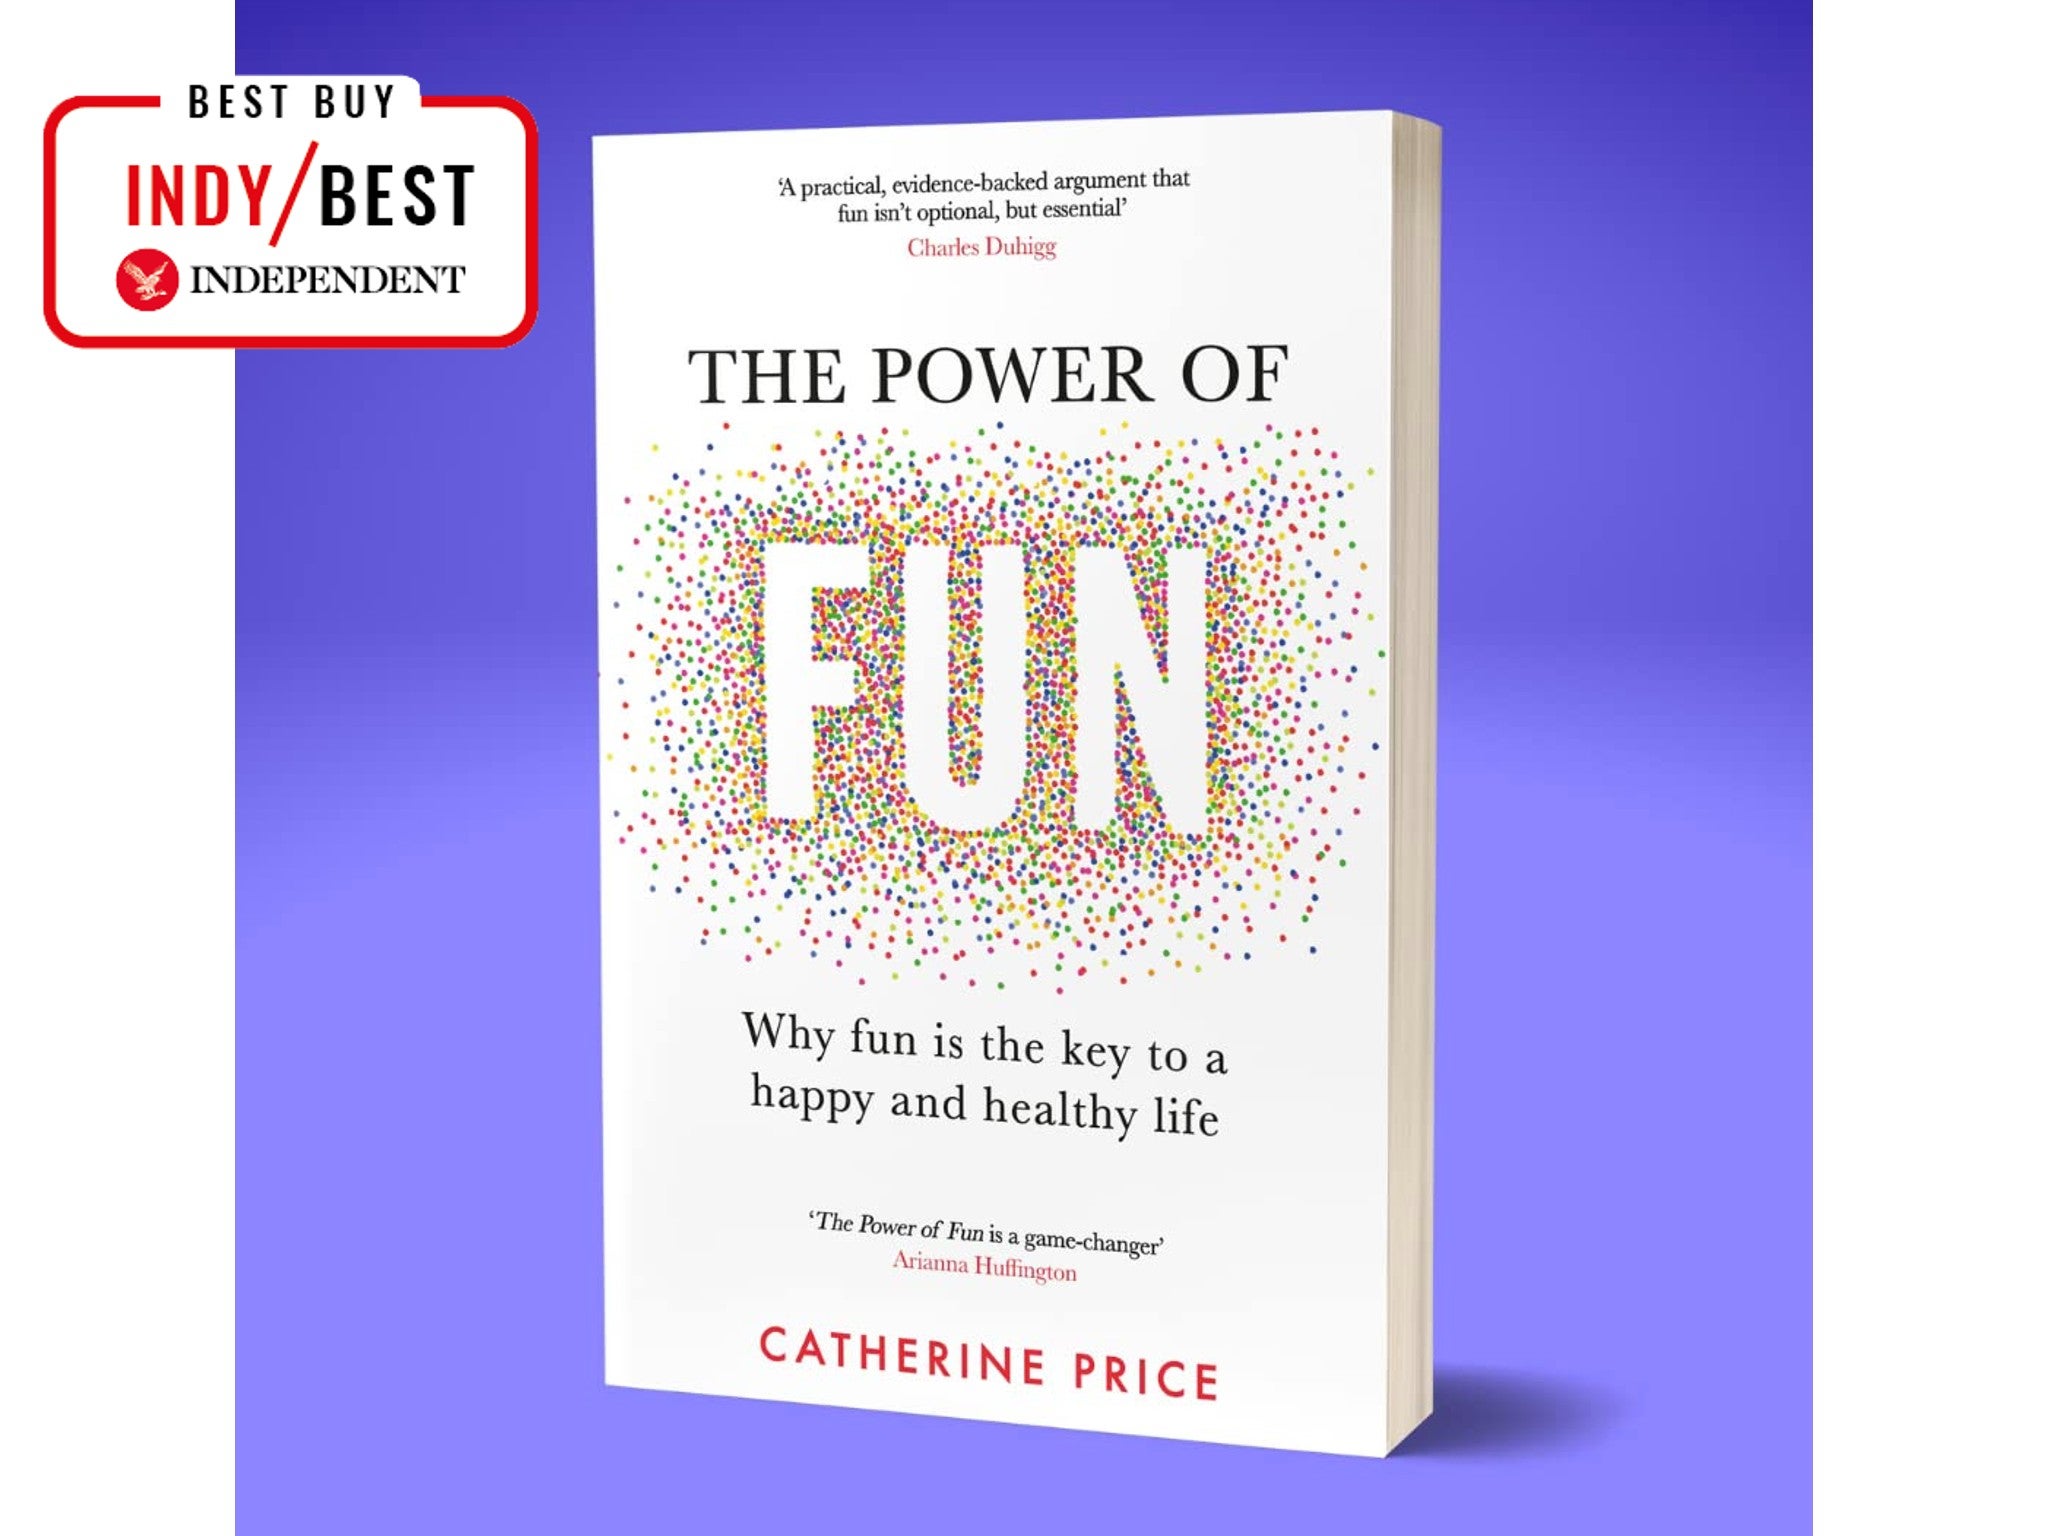 ‘The Power of Fun’ by Catherine Price, indybest.jpg